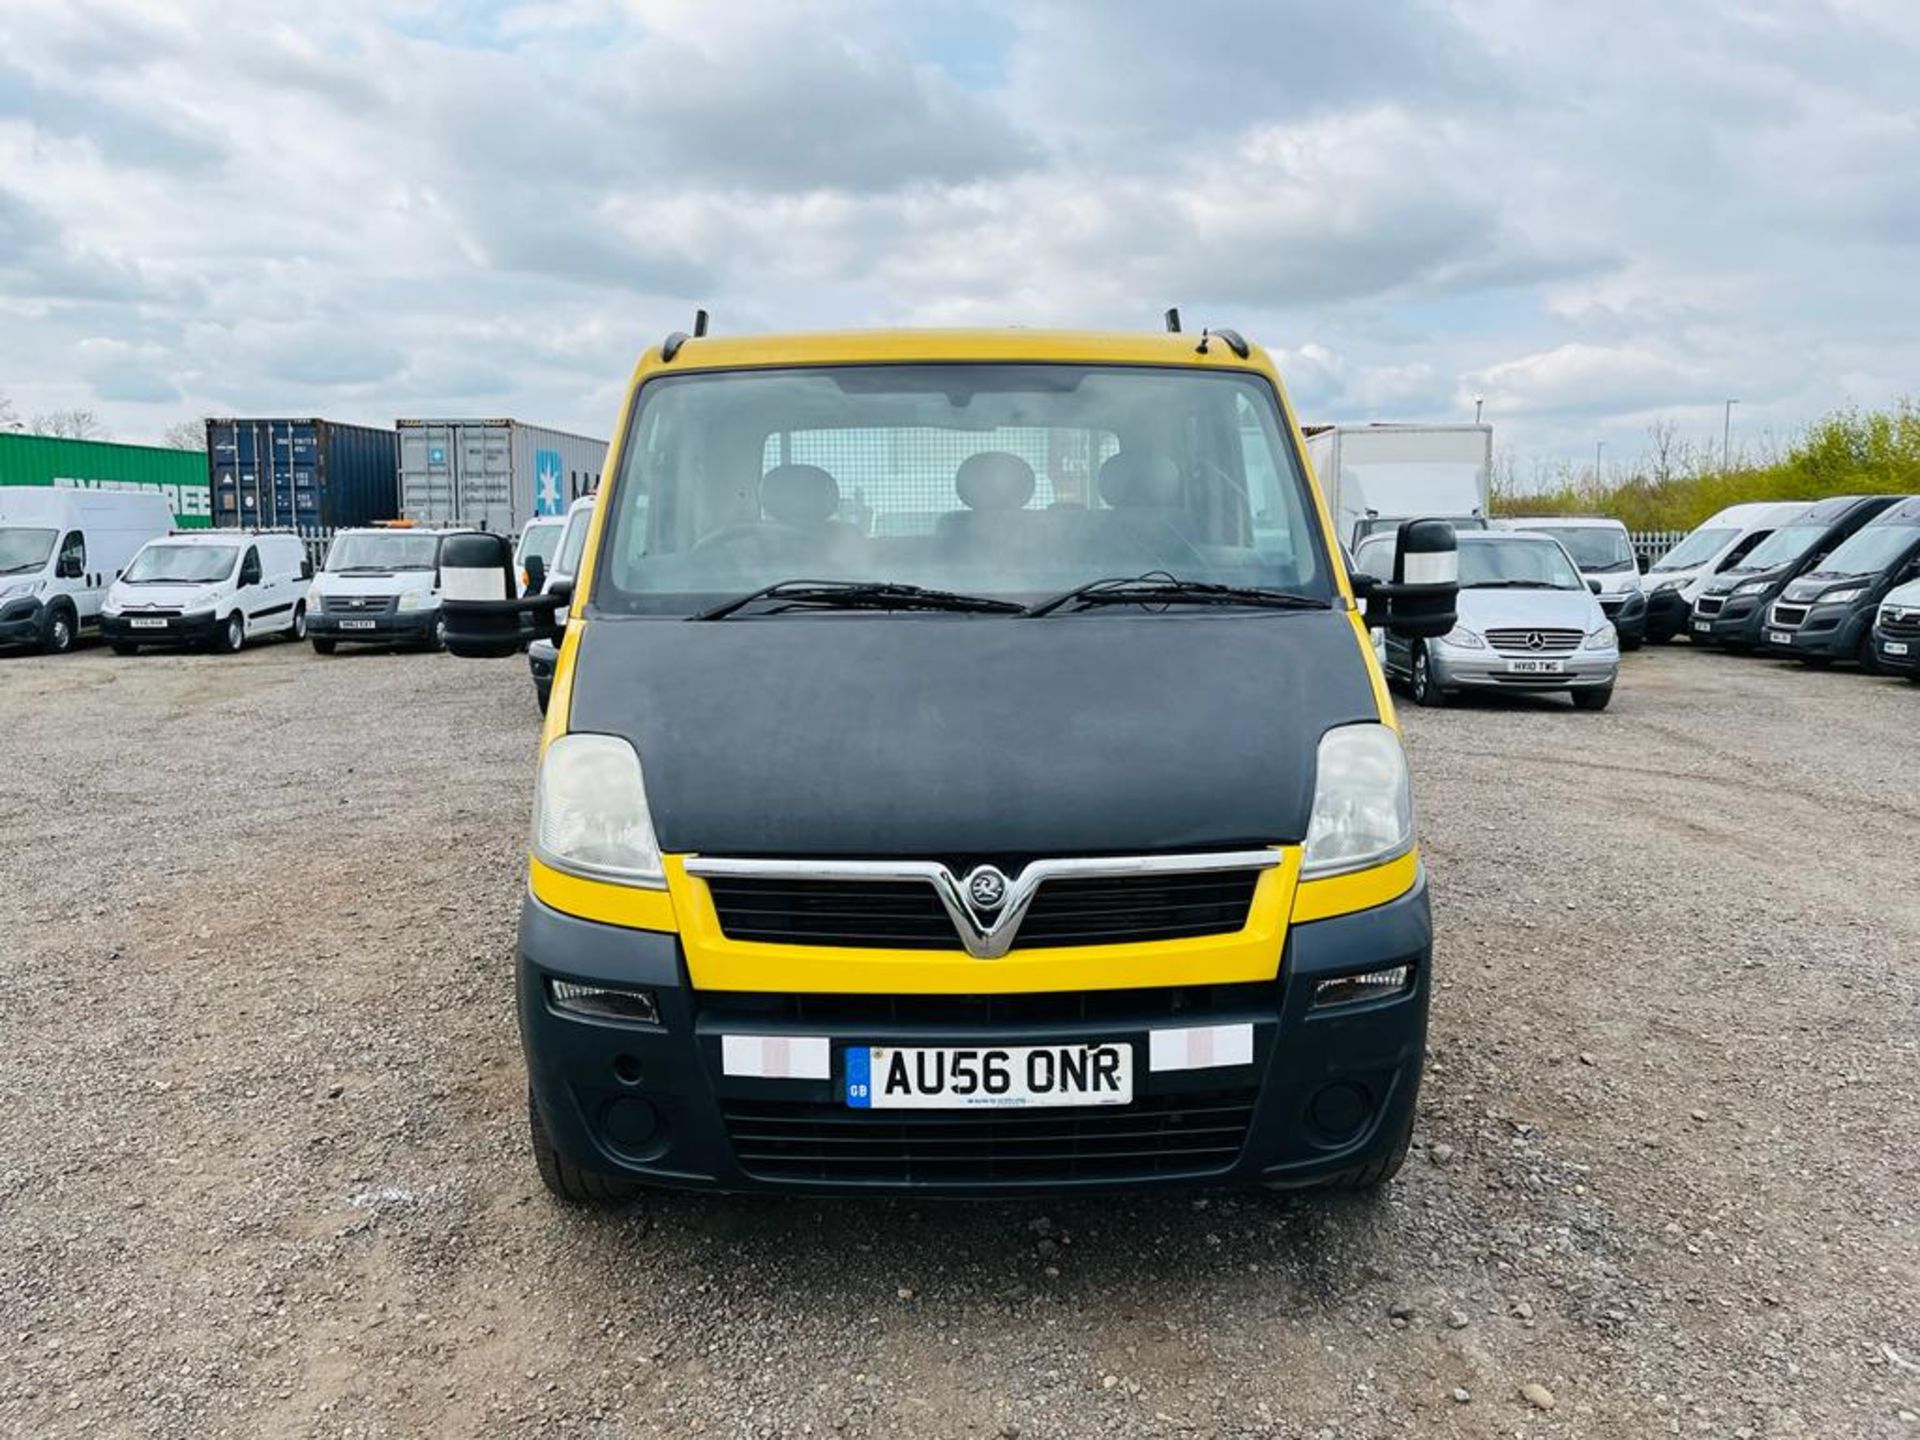 ** ON SALE ** Vauxhall Movano 3500 2.5 CDTI Double Cab Tipper 2006 '56 Reg' No Vat - Image 2 of 27